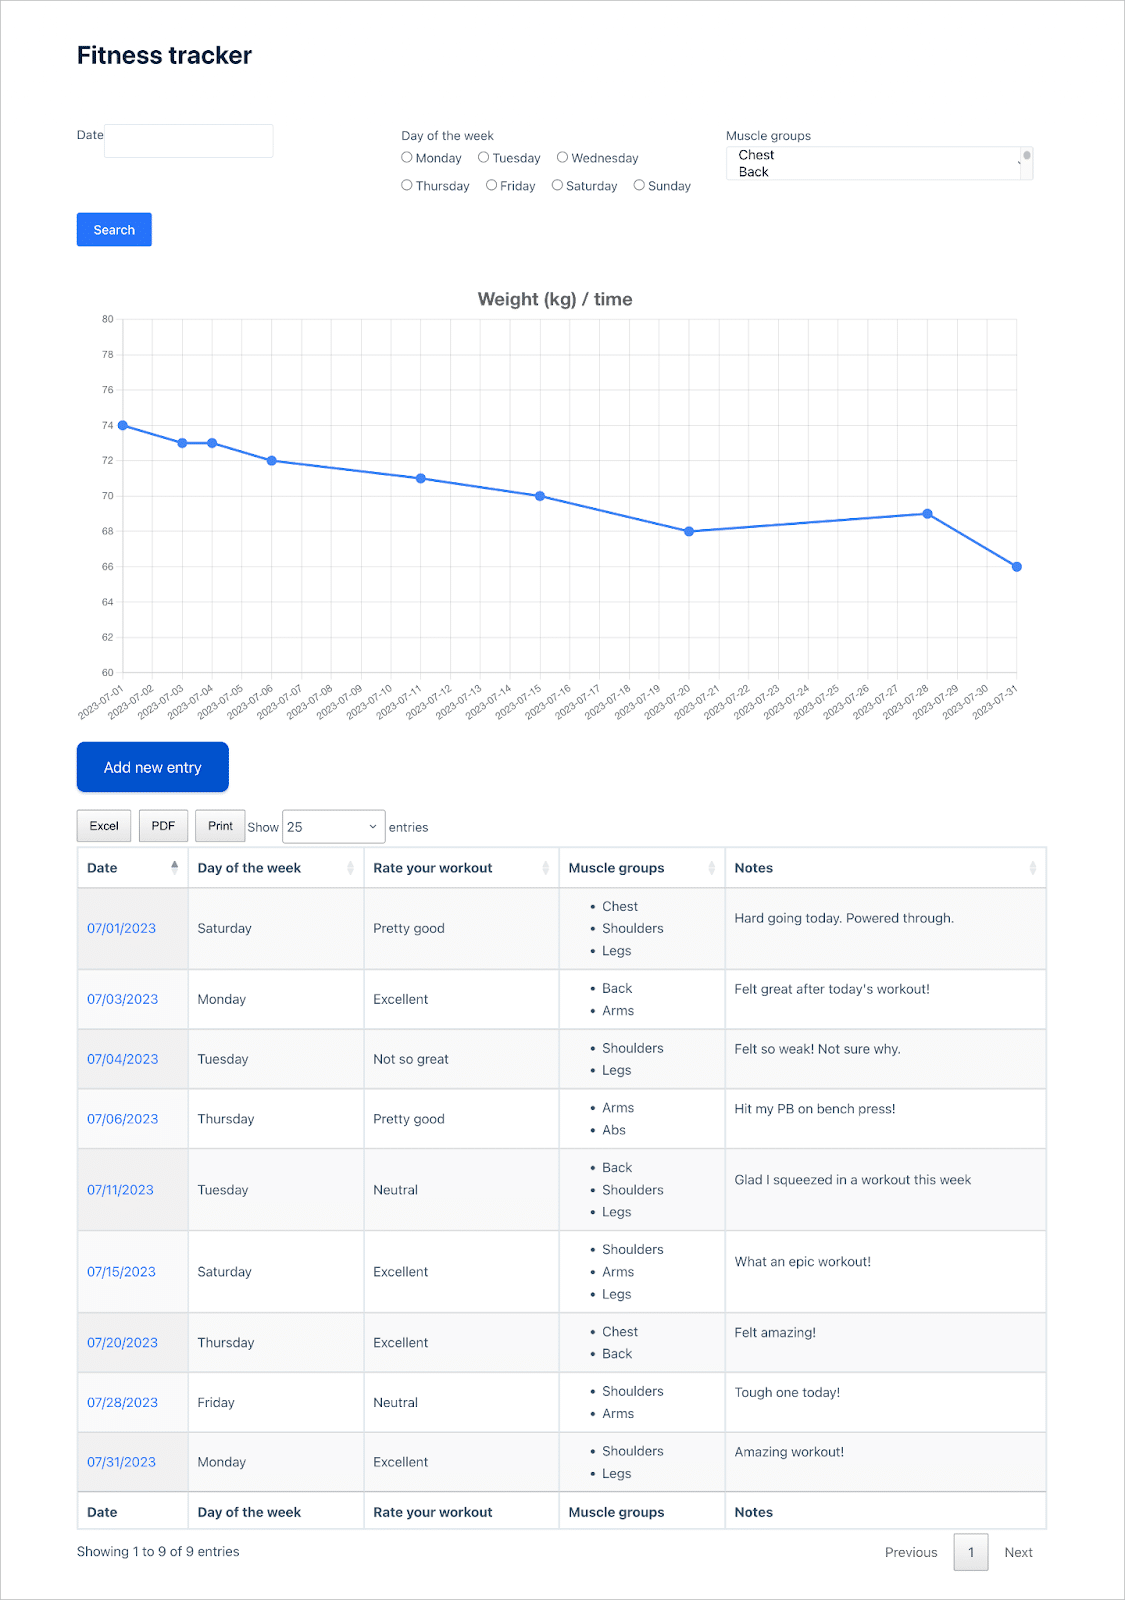 A fitness tracker app built using GravityView; it includes a graph and a table of tracking info